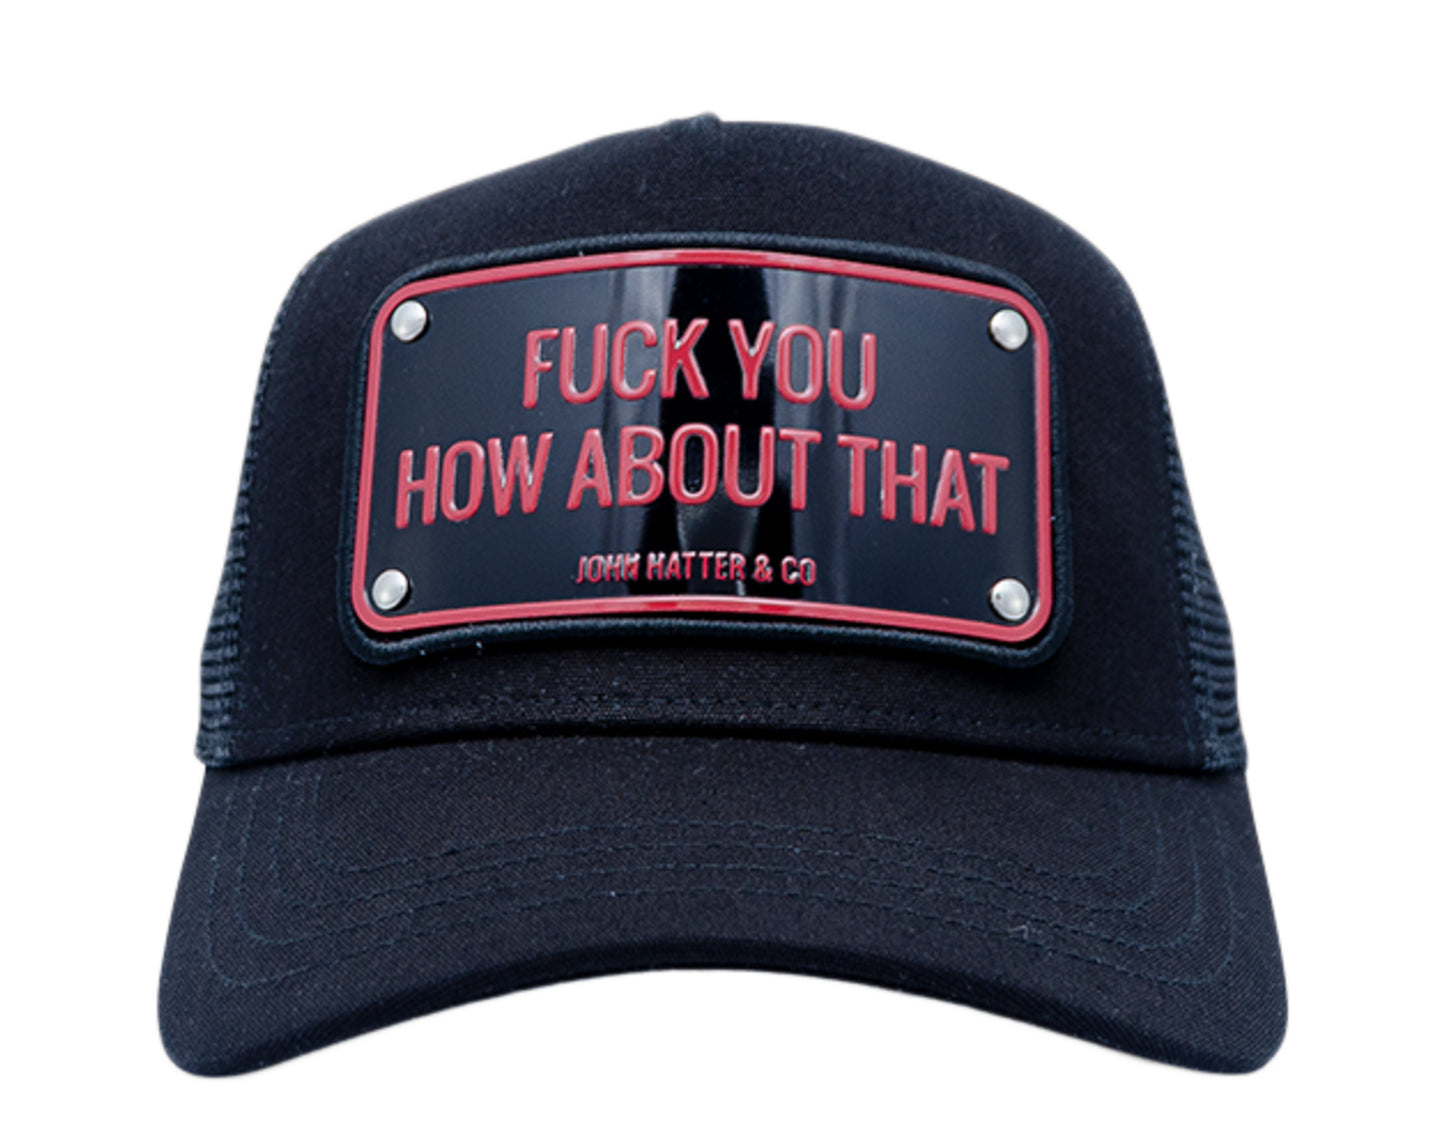 John Hatter & Co Fuck You How About That Trucker Hat